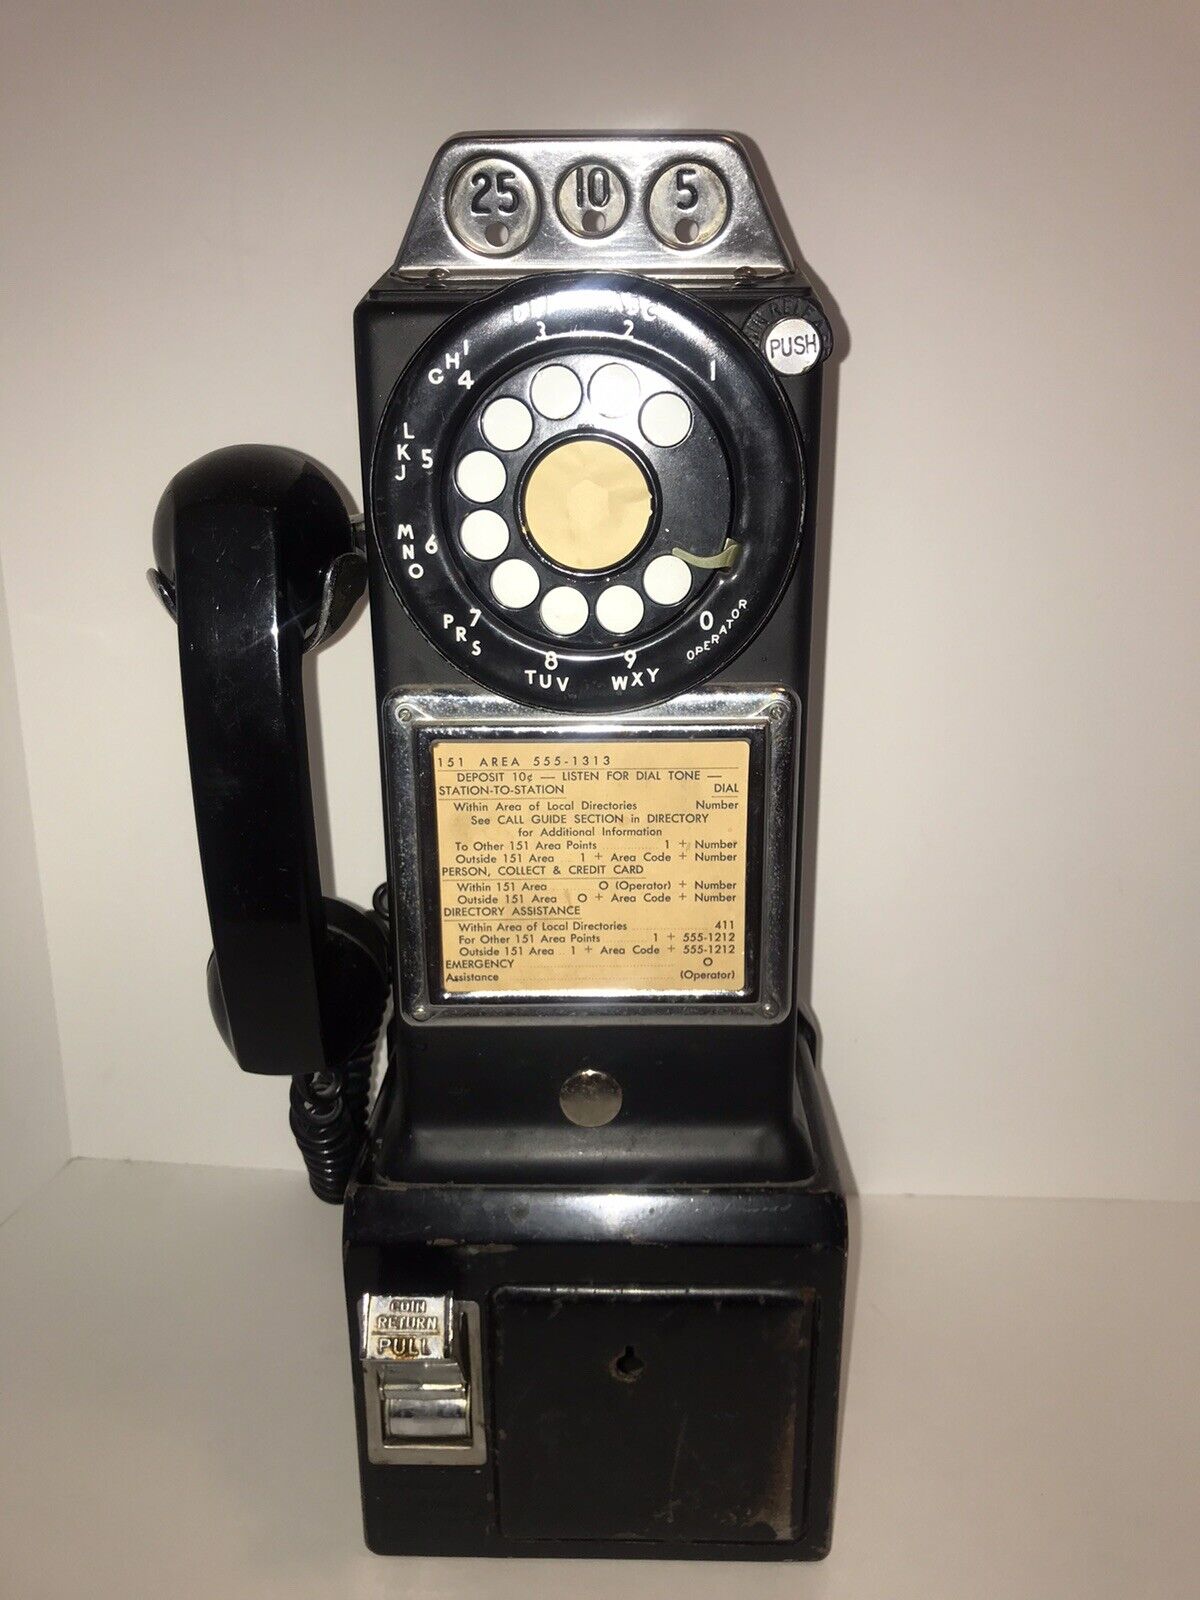 Vintage Northern Electric rotary pay phone. Authentic Item